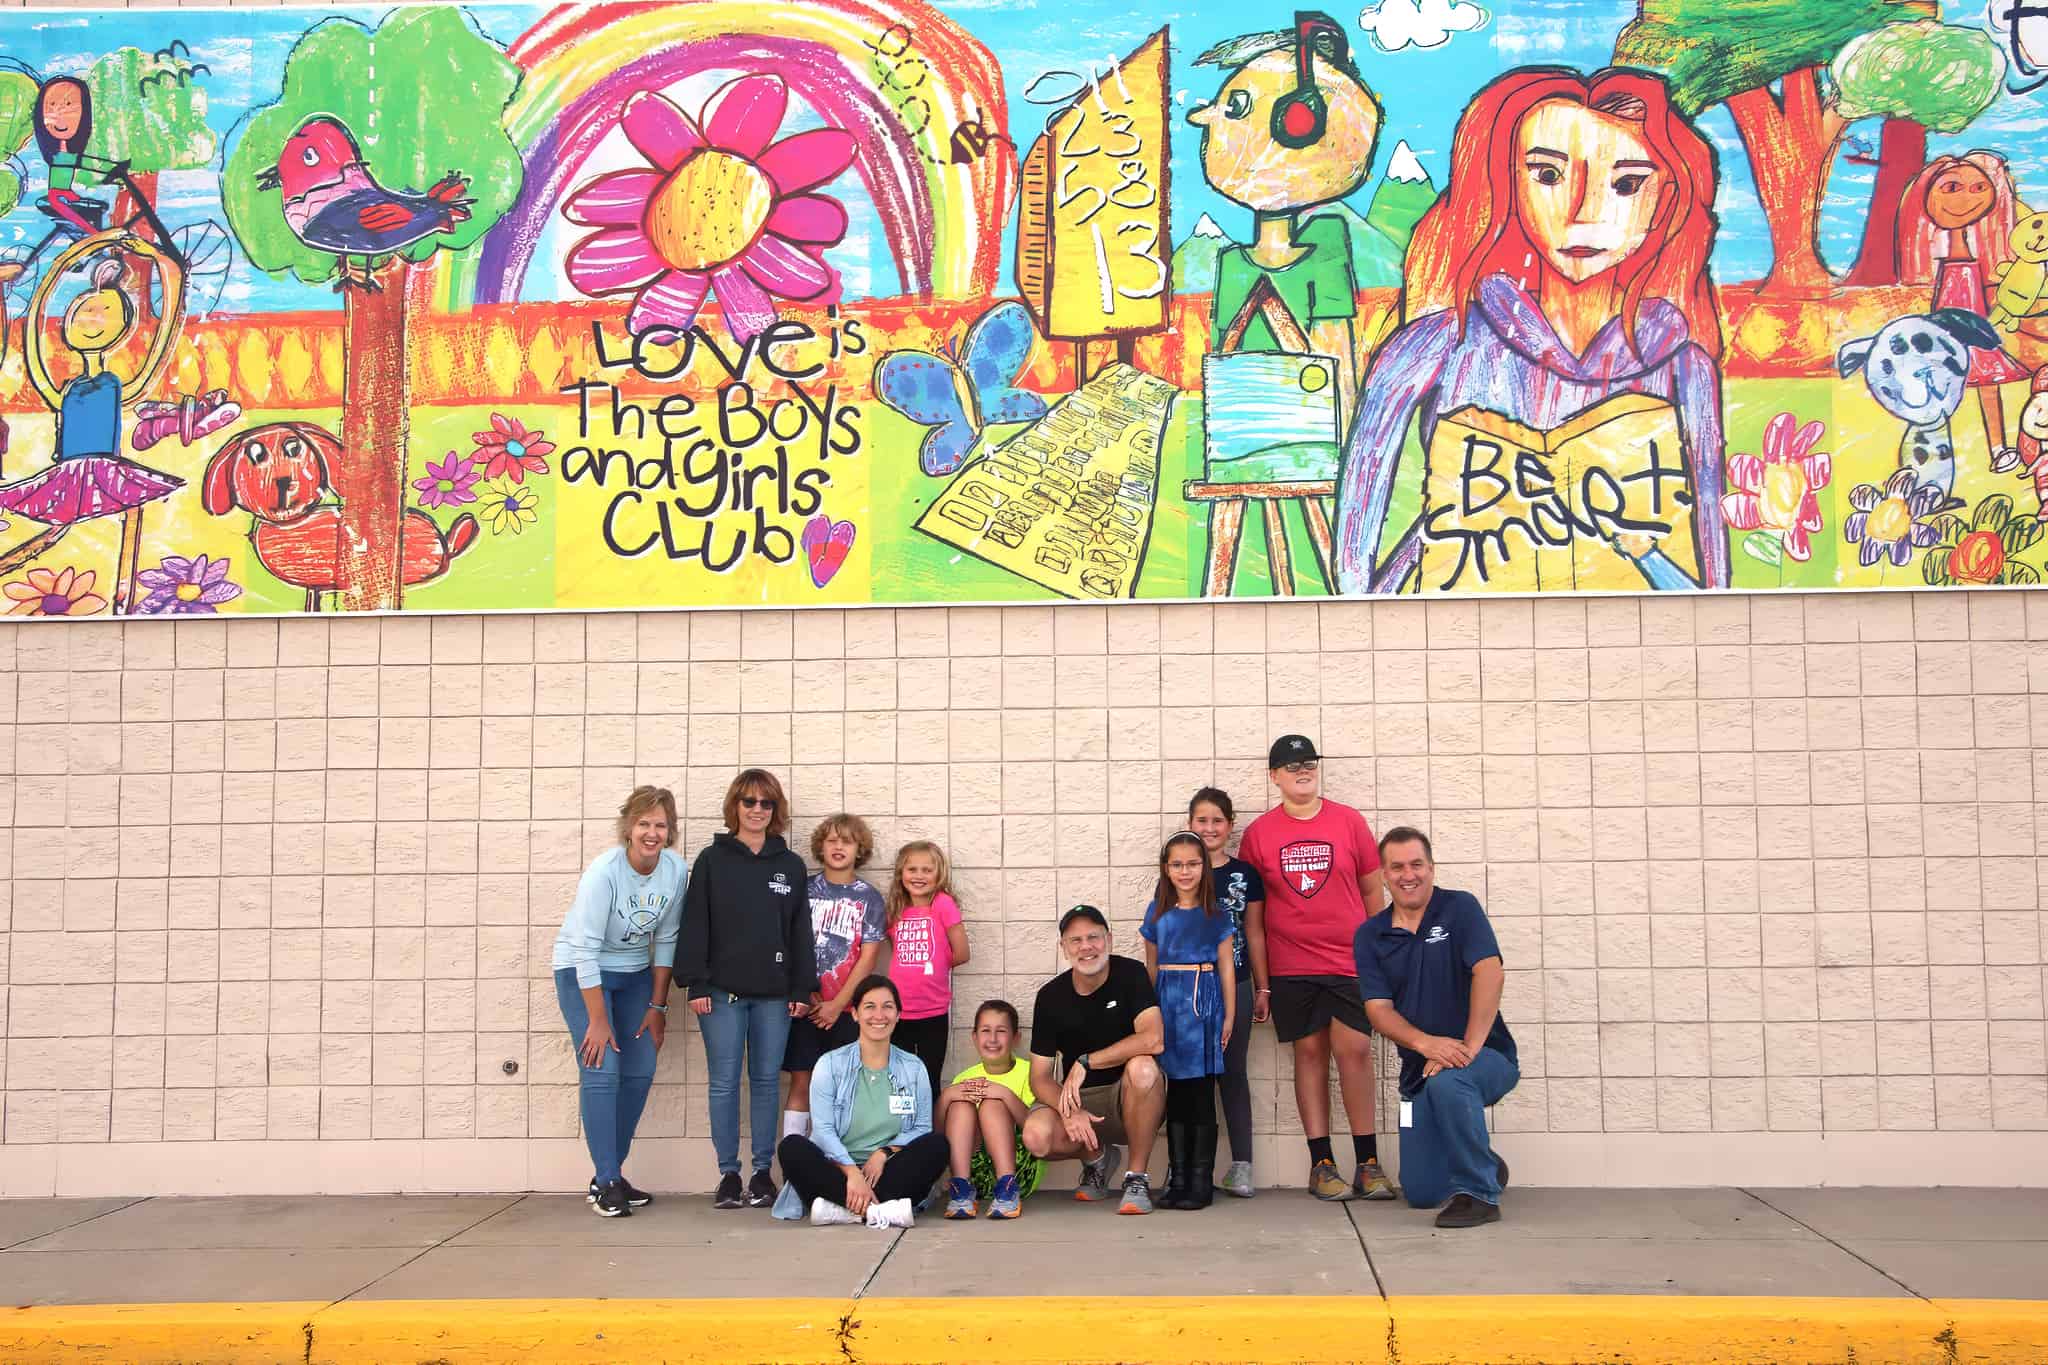 "Love is the Boys & Girls Club" mural • Project 412, Boys & Girls Club Thrift Store & MORE store, and Boys & Girls Club leaders and youth standing in front of a segment of the art • on the exterior wall of the Boy & Girls Club Thrift Store & MORE • Artist: Paul Johnson